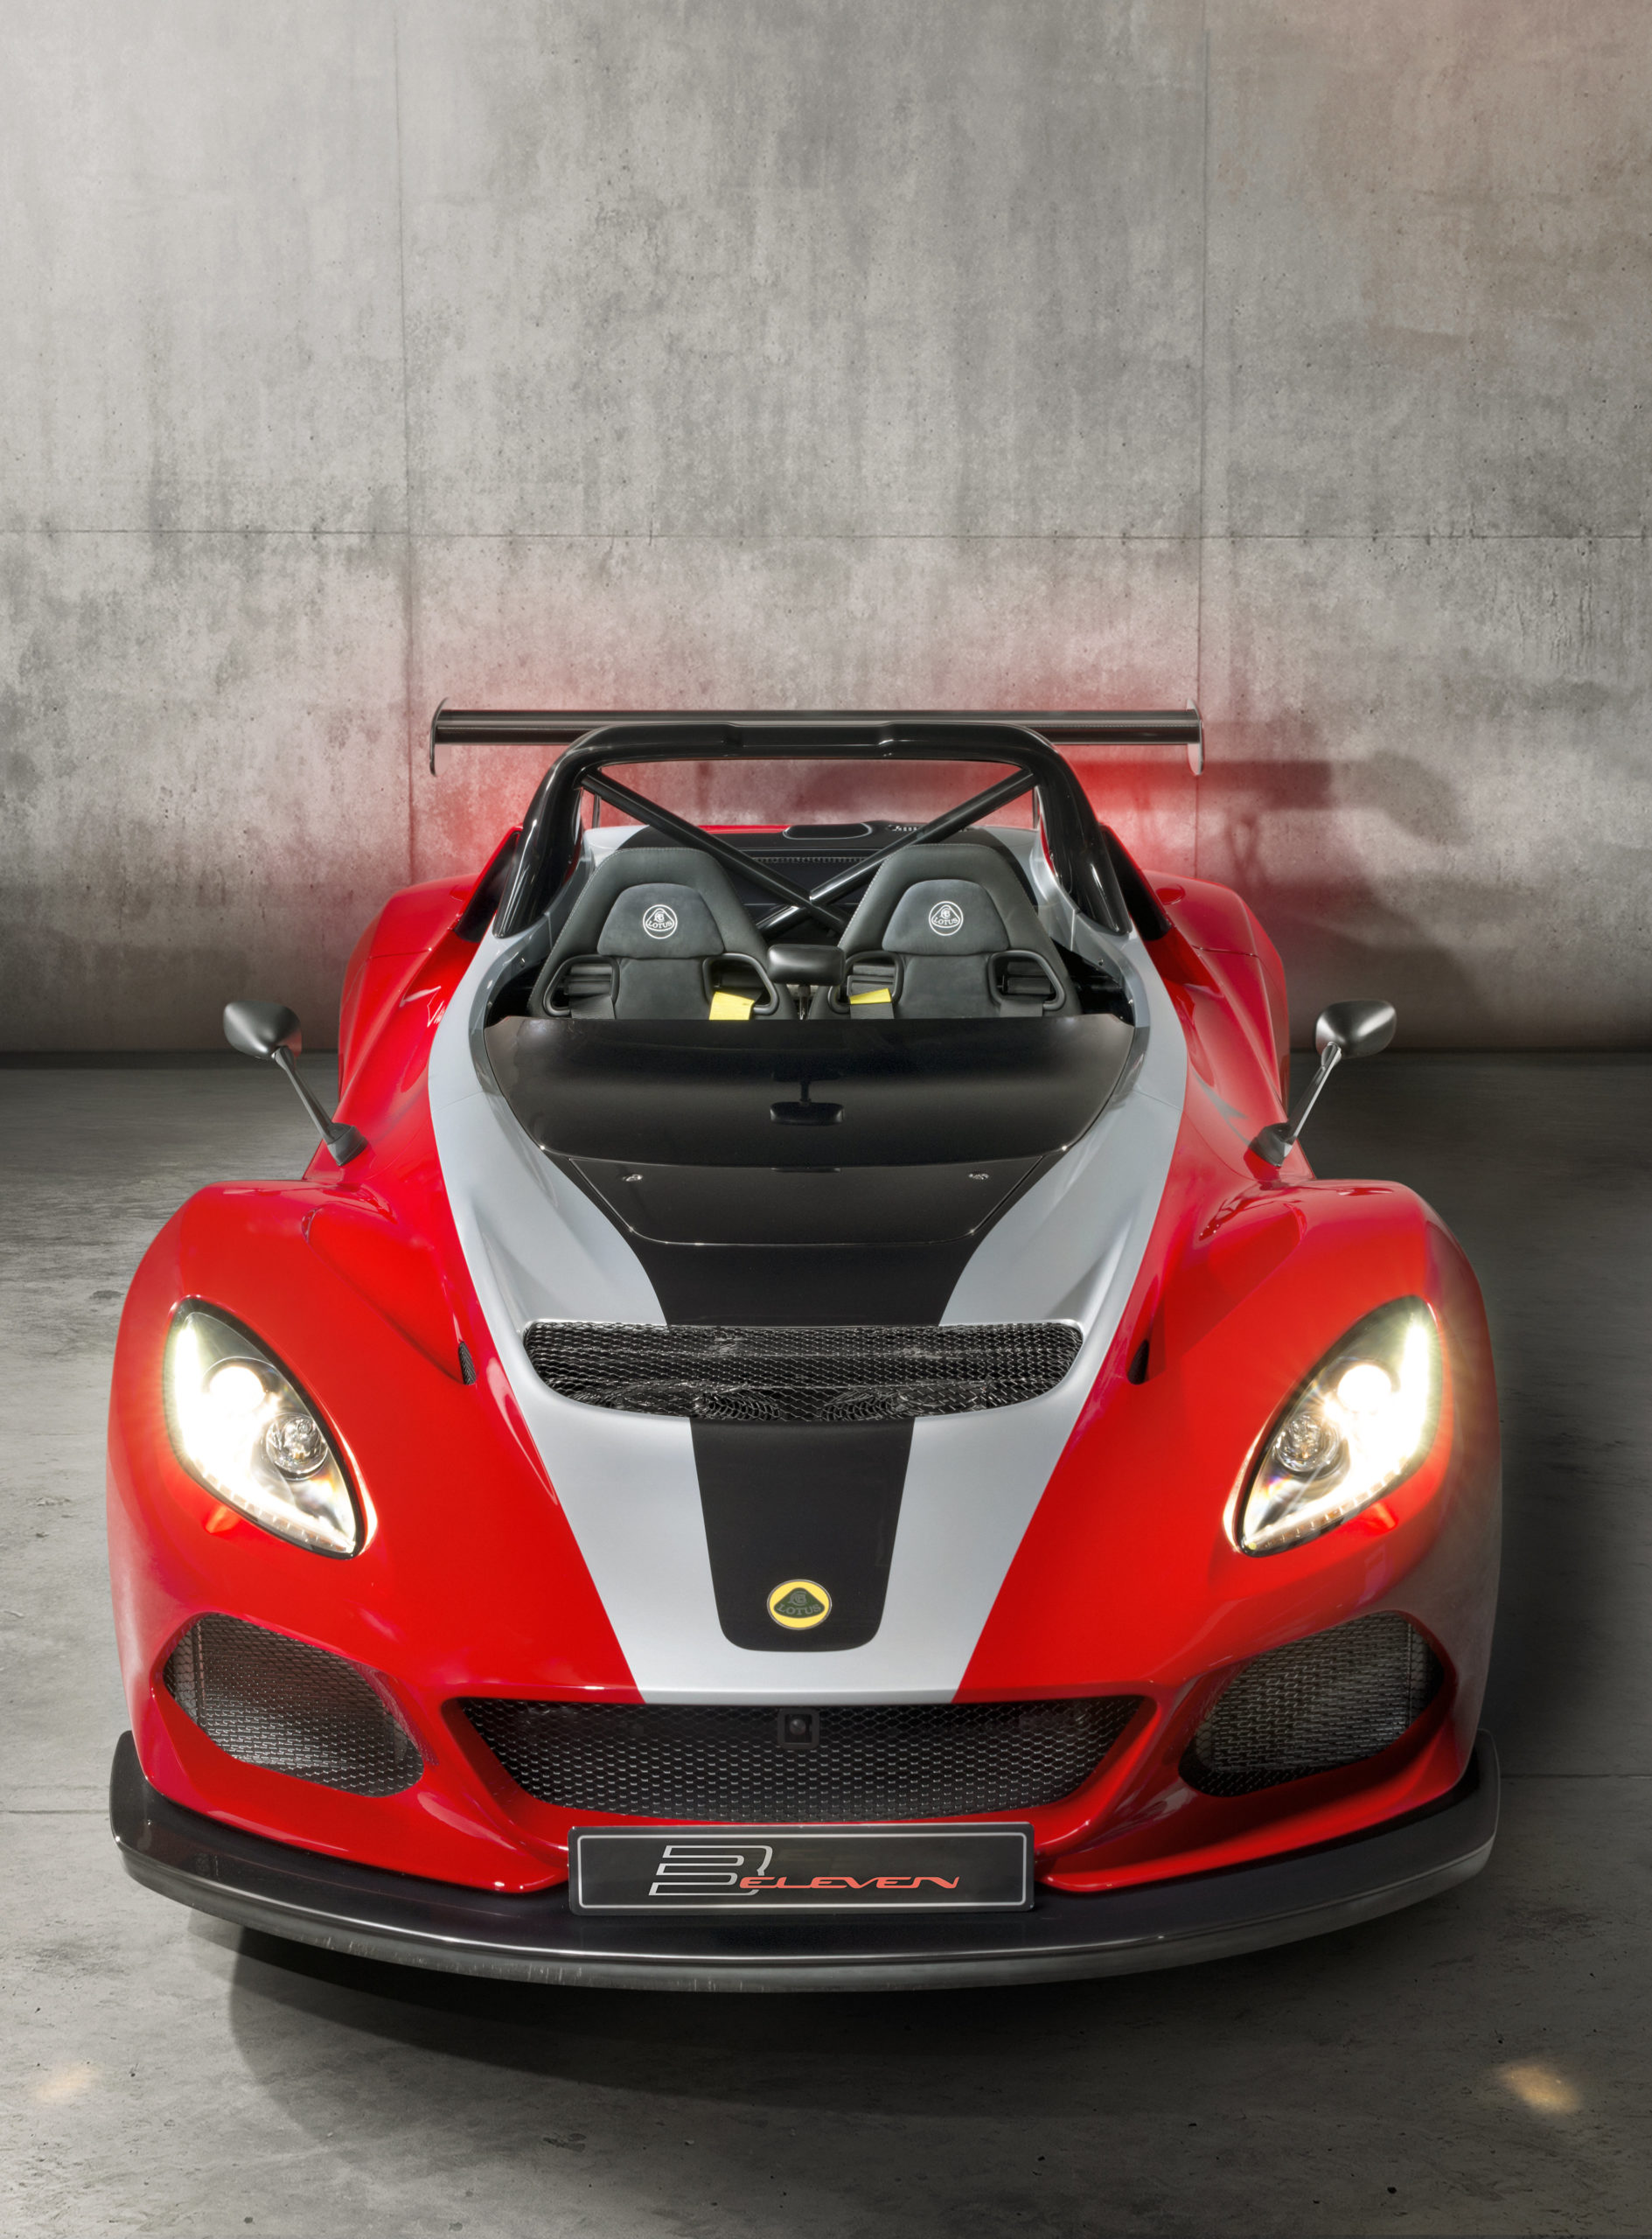 The new 3-Eleven 430 is Lotusâ€™ quickest street-legal sports car